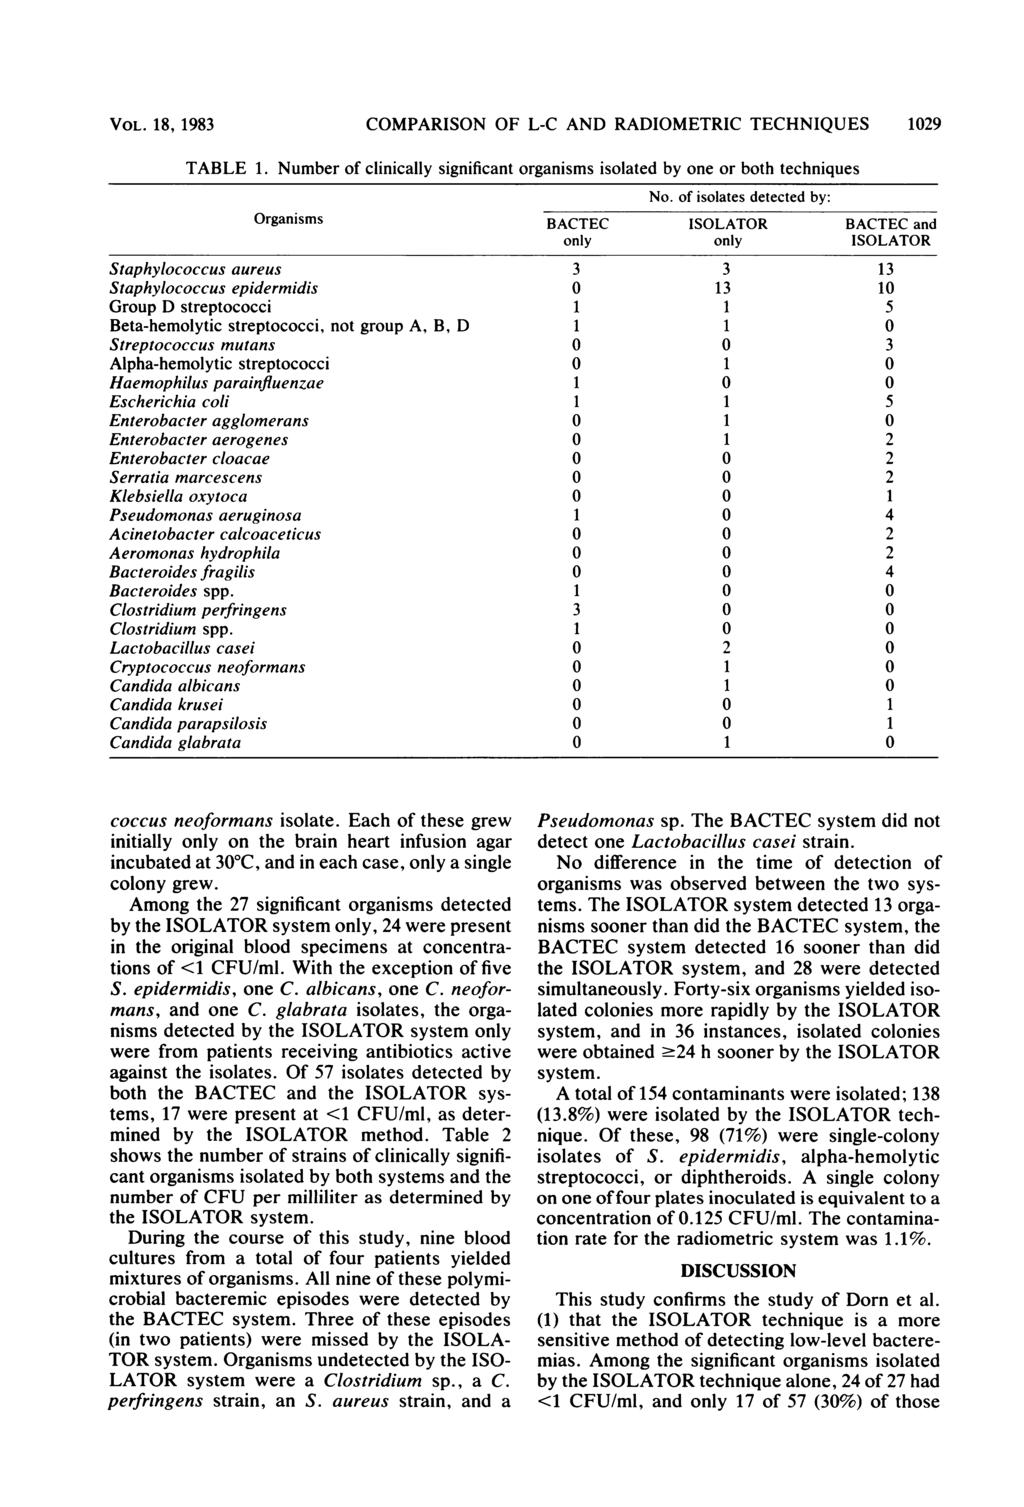 VOL. 18, 1983 COMPARISON OF L-C AND RADIOMETRIC TECHNIQUES 1029 TABLE 1. Number of clinically significant organisms isolated by one or both techniques No.